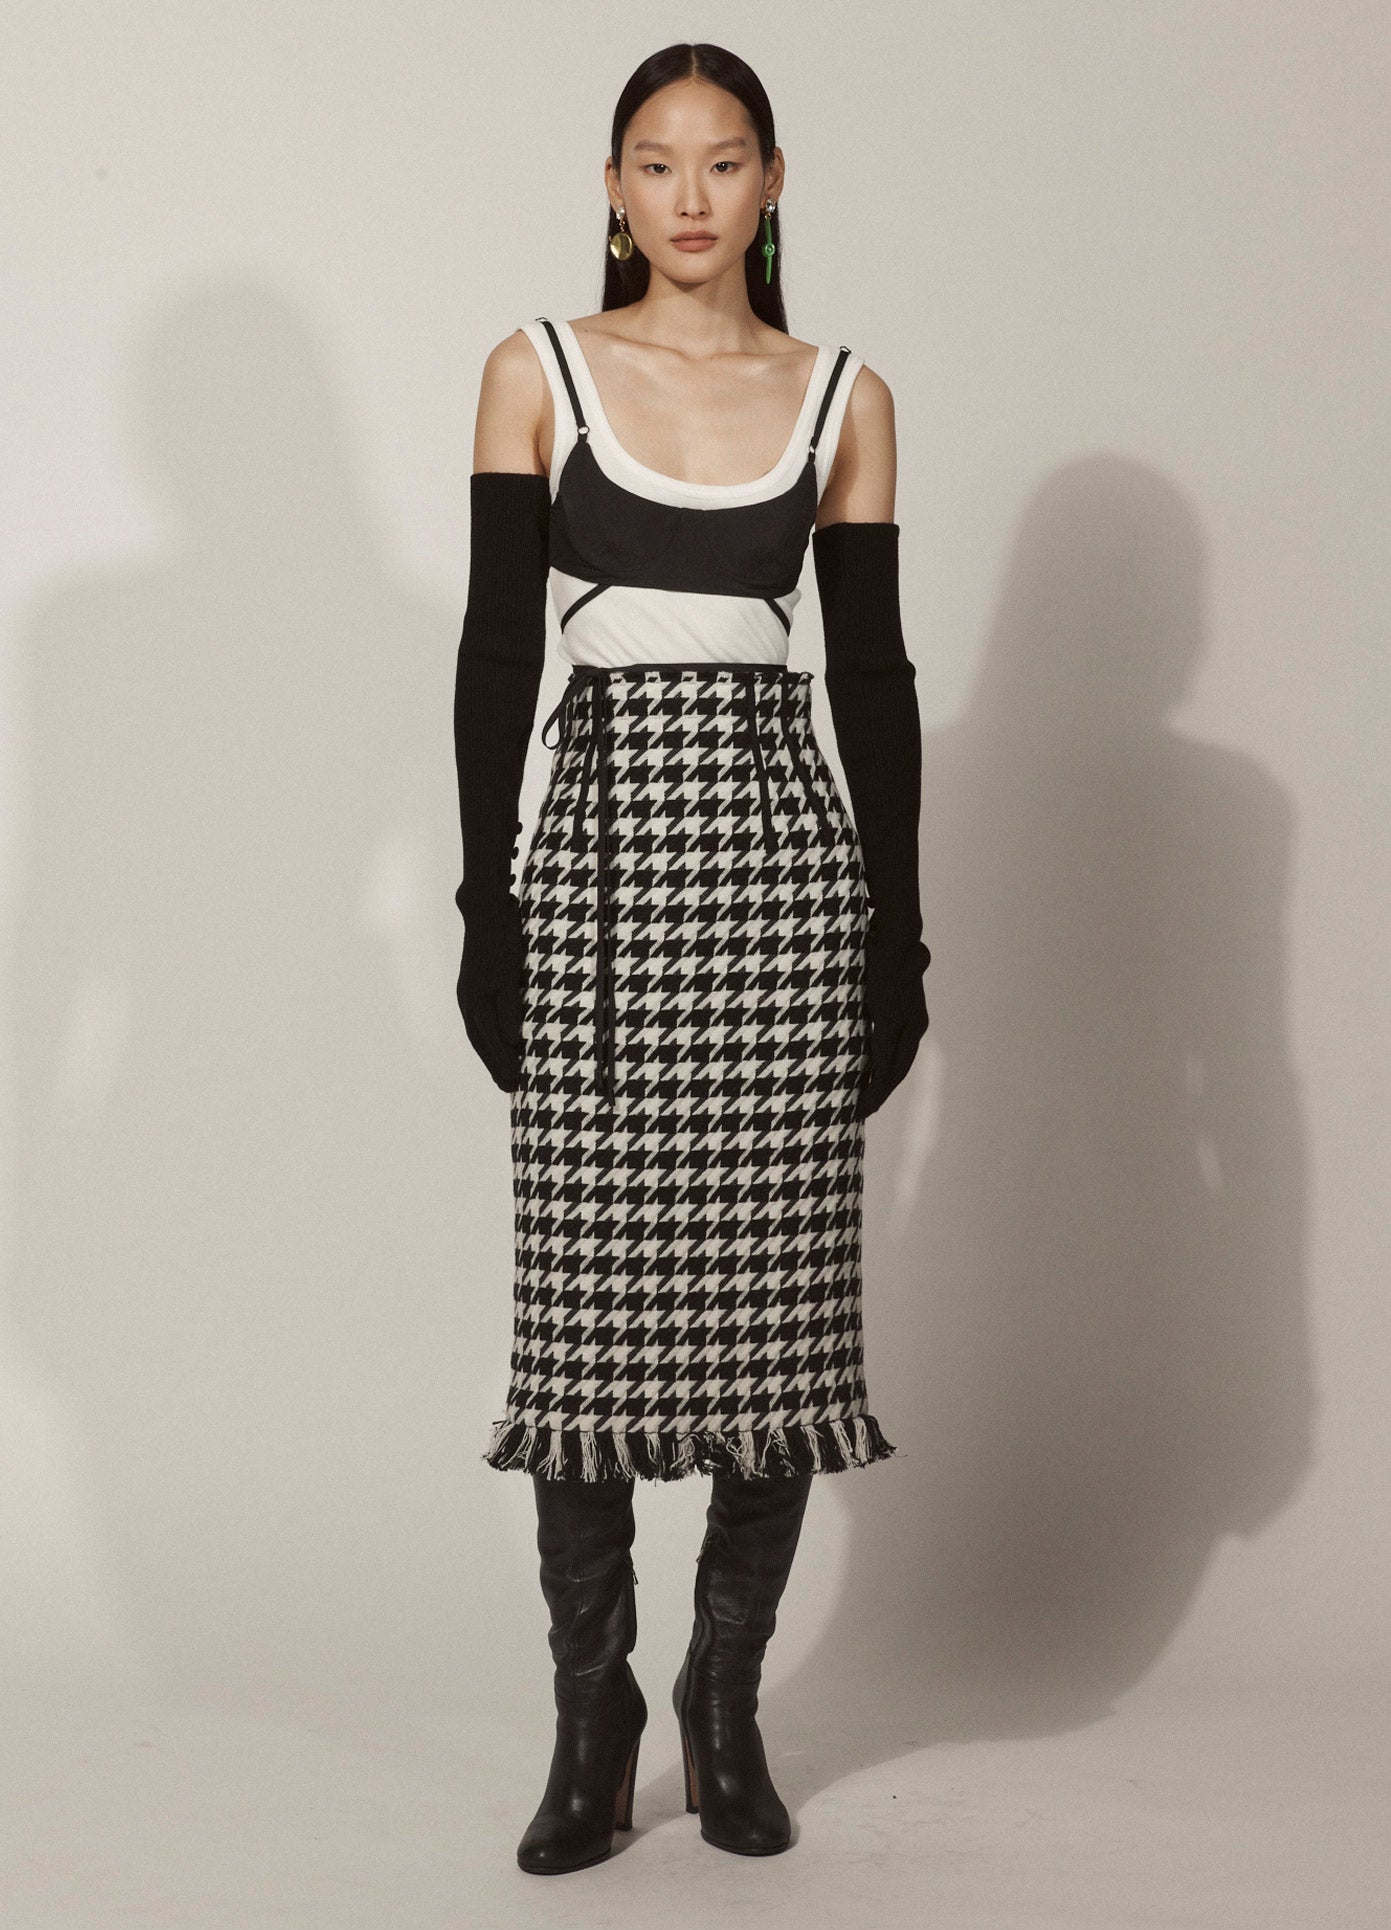 MONSE Tweed Lace Up Skirt in Black and Ivory on Model Lookbook Full Front View